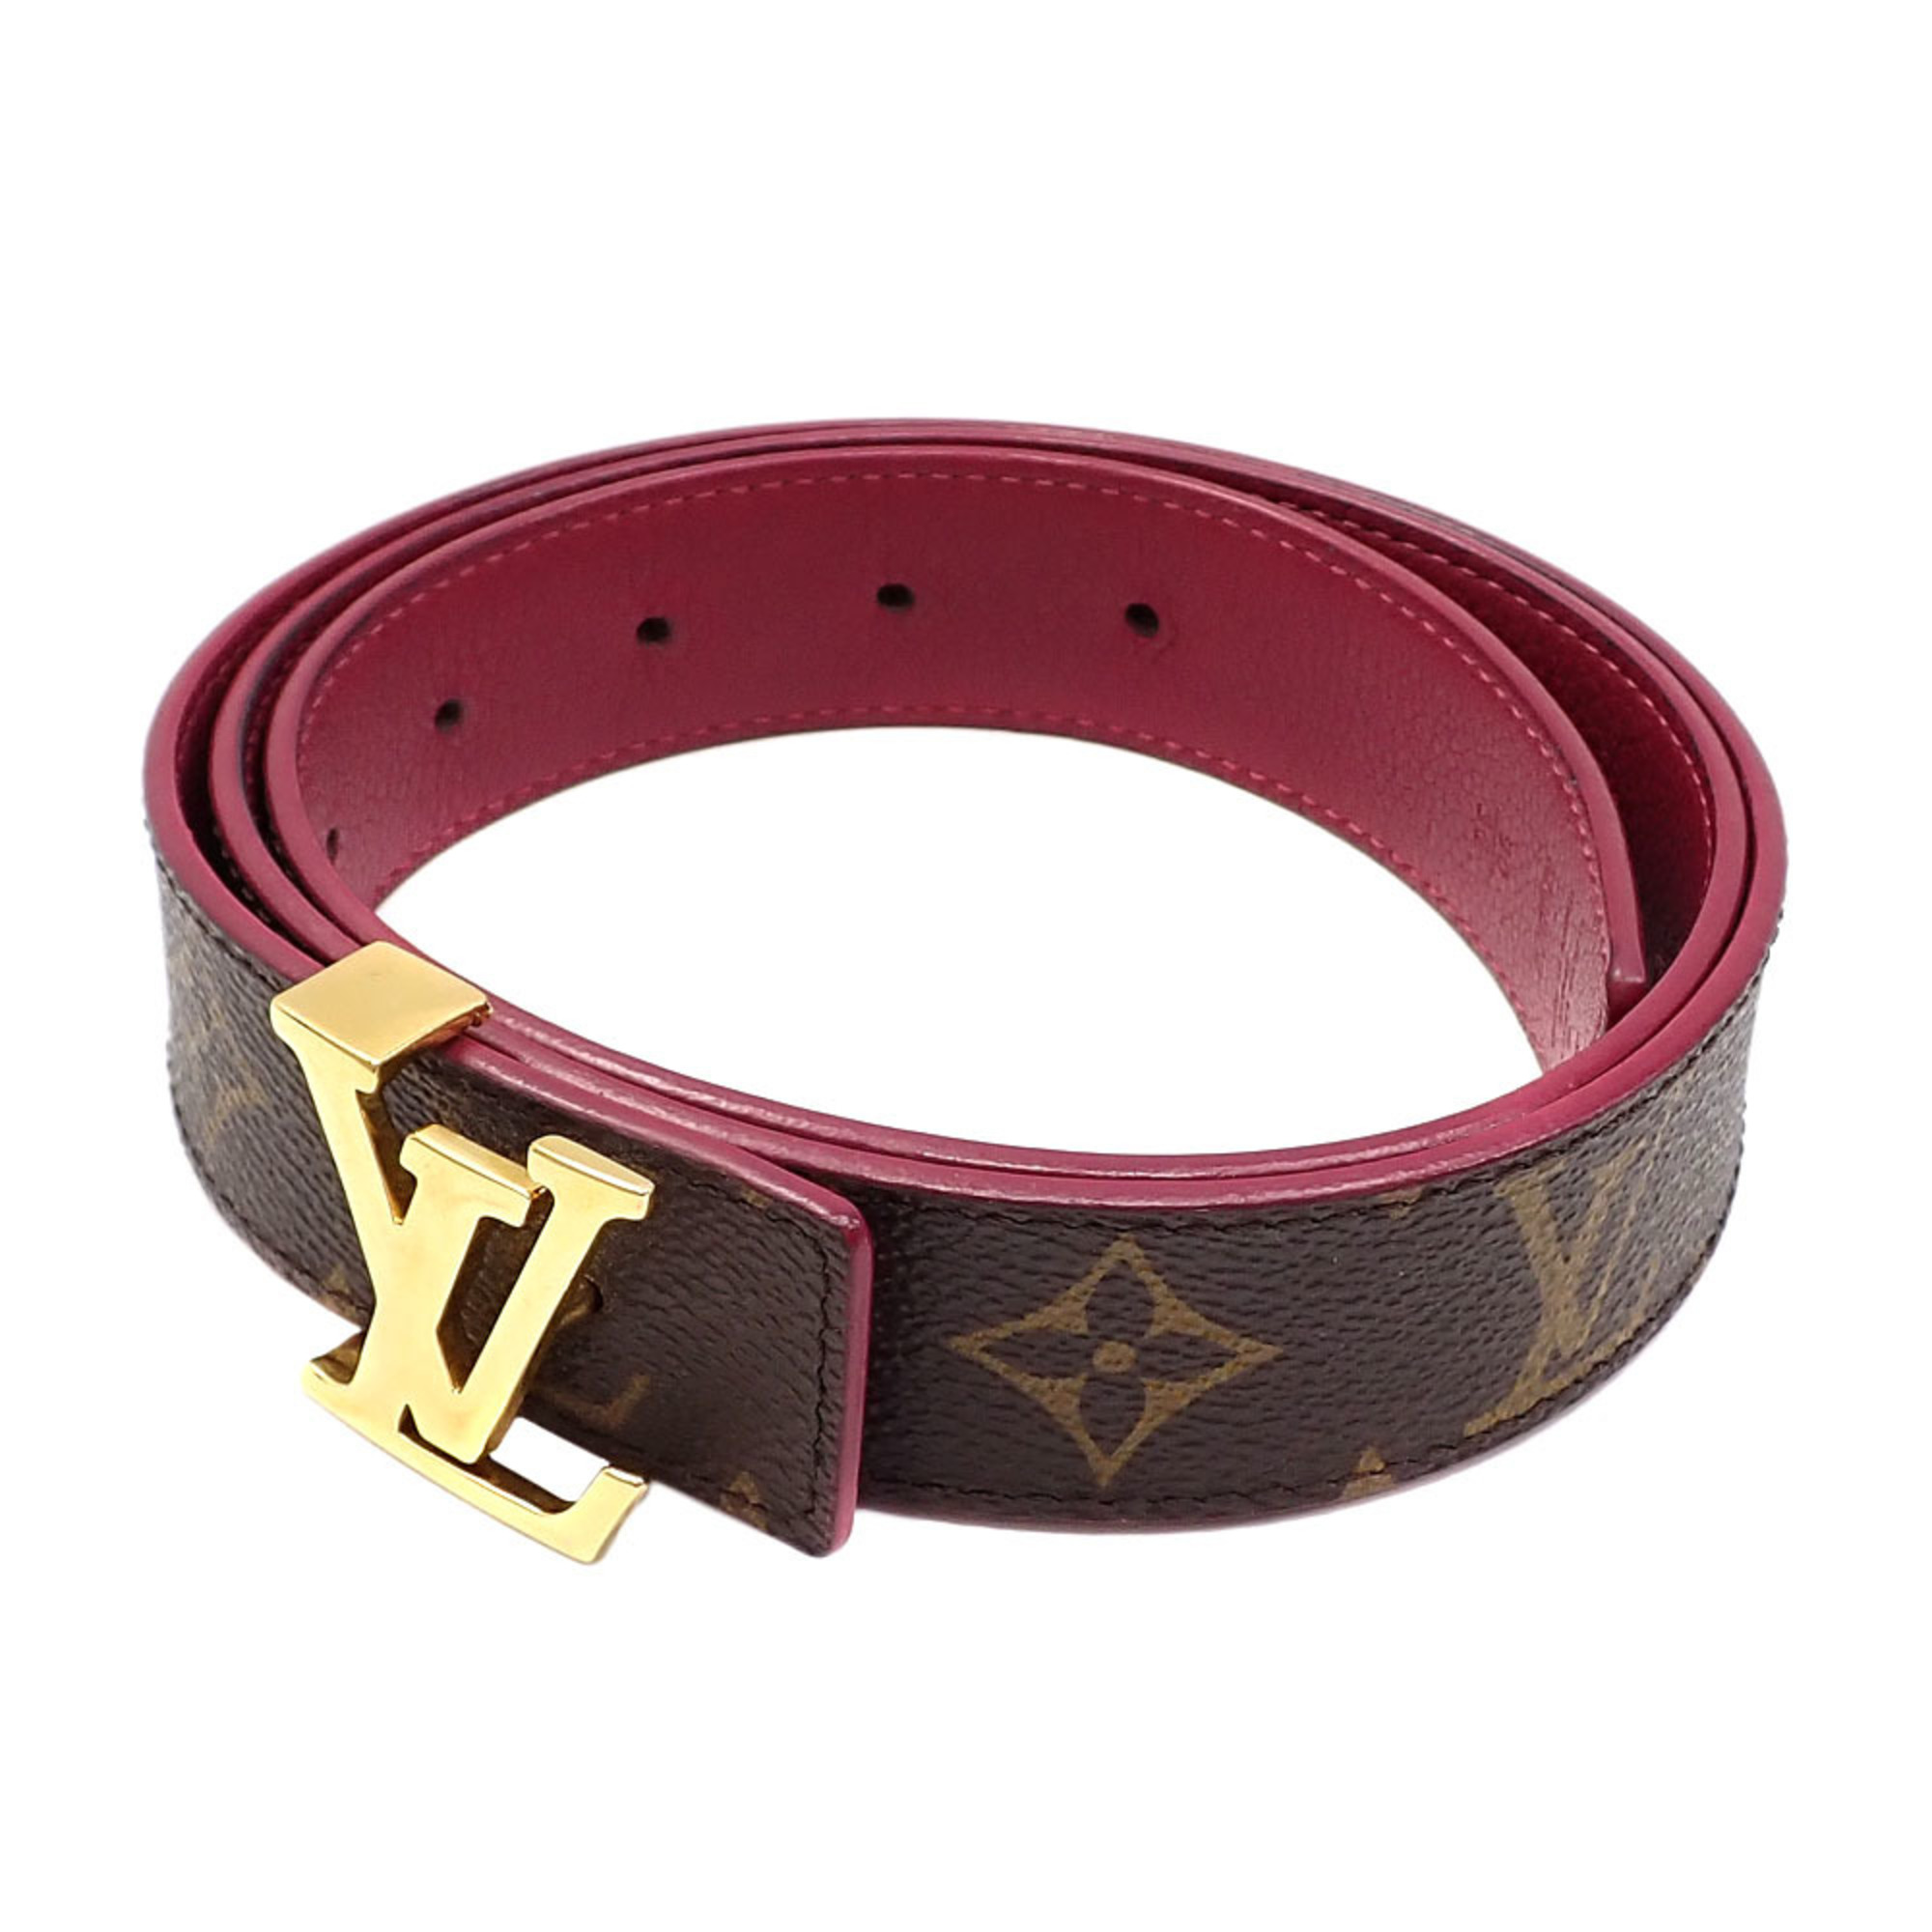 Louis Vuitton LV Initiales 30 MM Reversible Belt Cherry Red